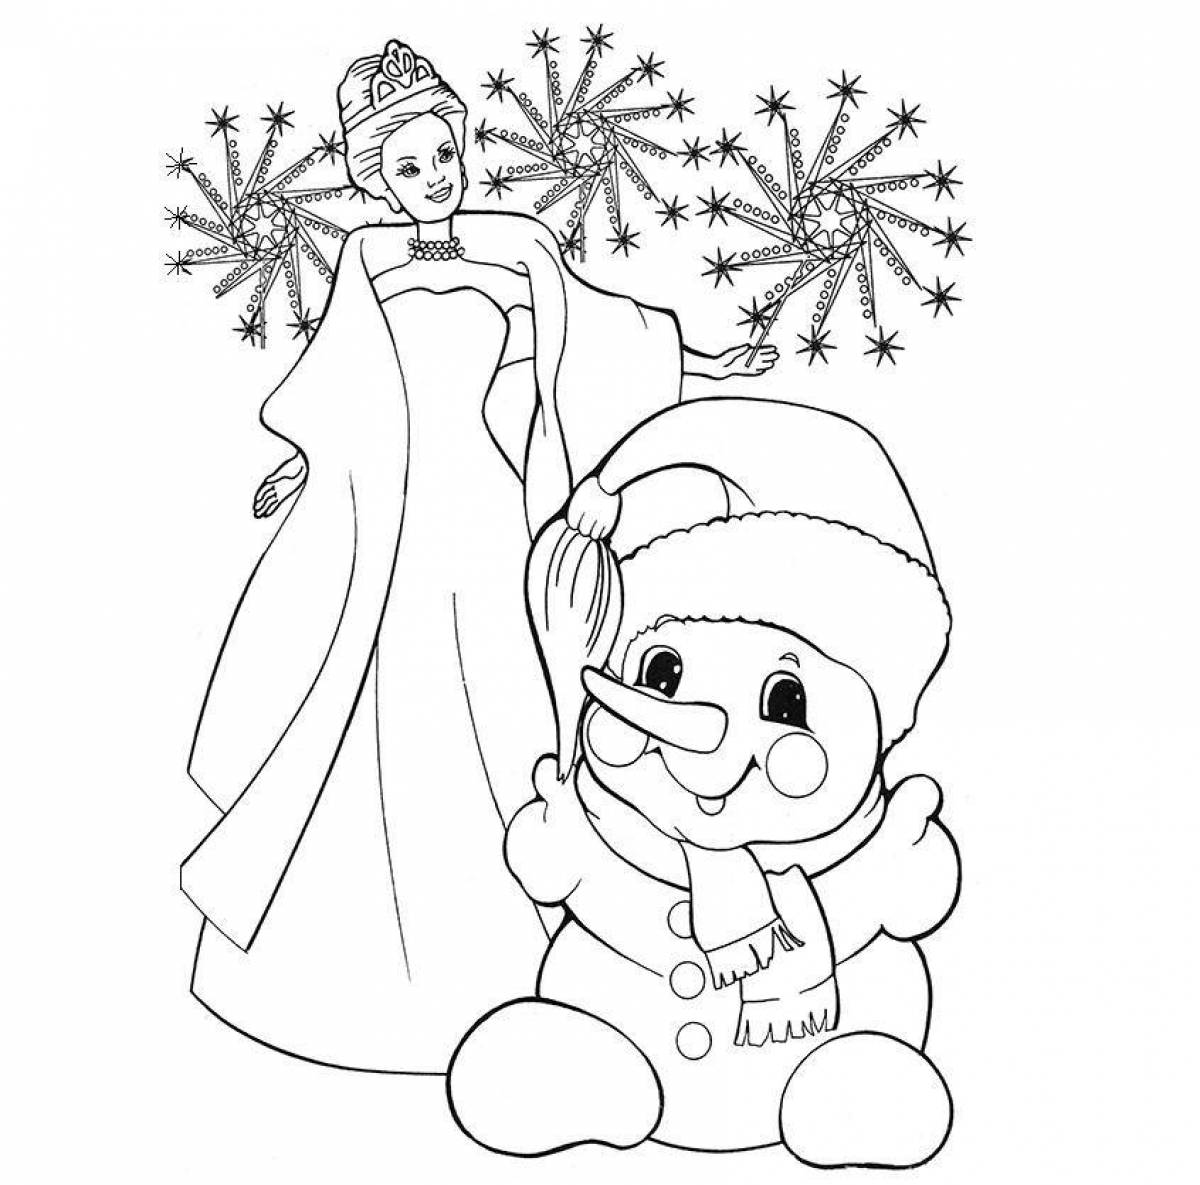 Amazing coloring pages for girls, new